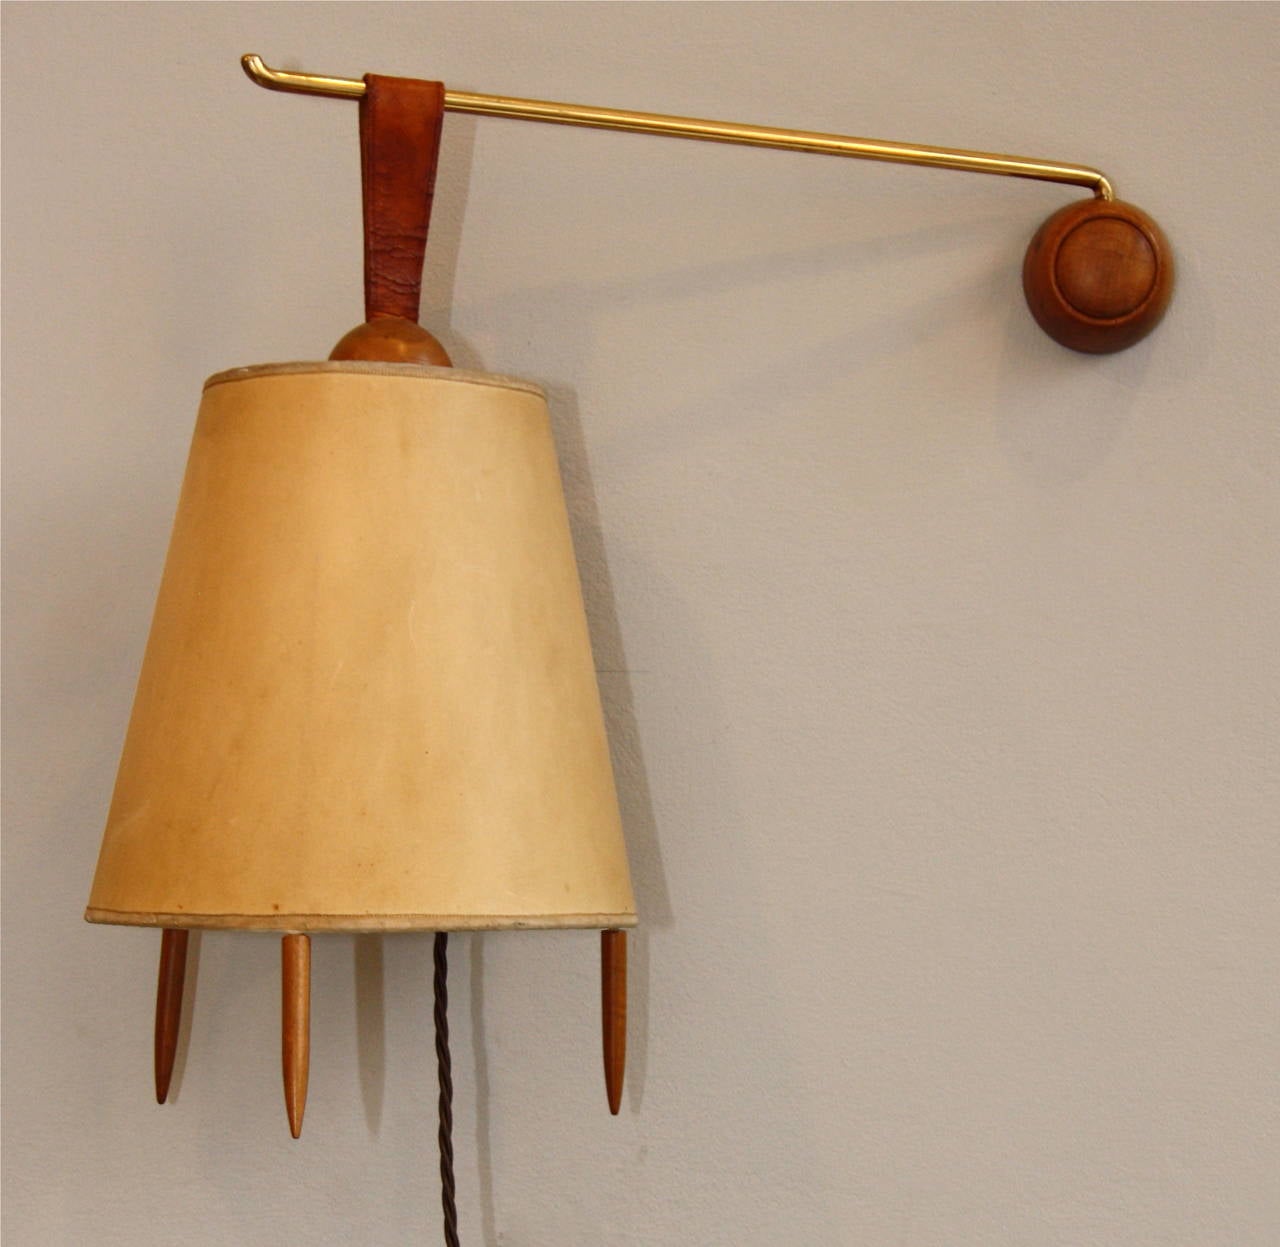 Austrian designed and made by Kalmar, the brass and wood arm allows the light to work as a wall light as well as a table light. Original shade.